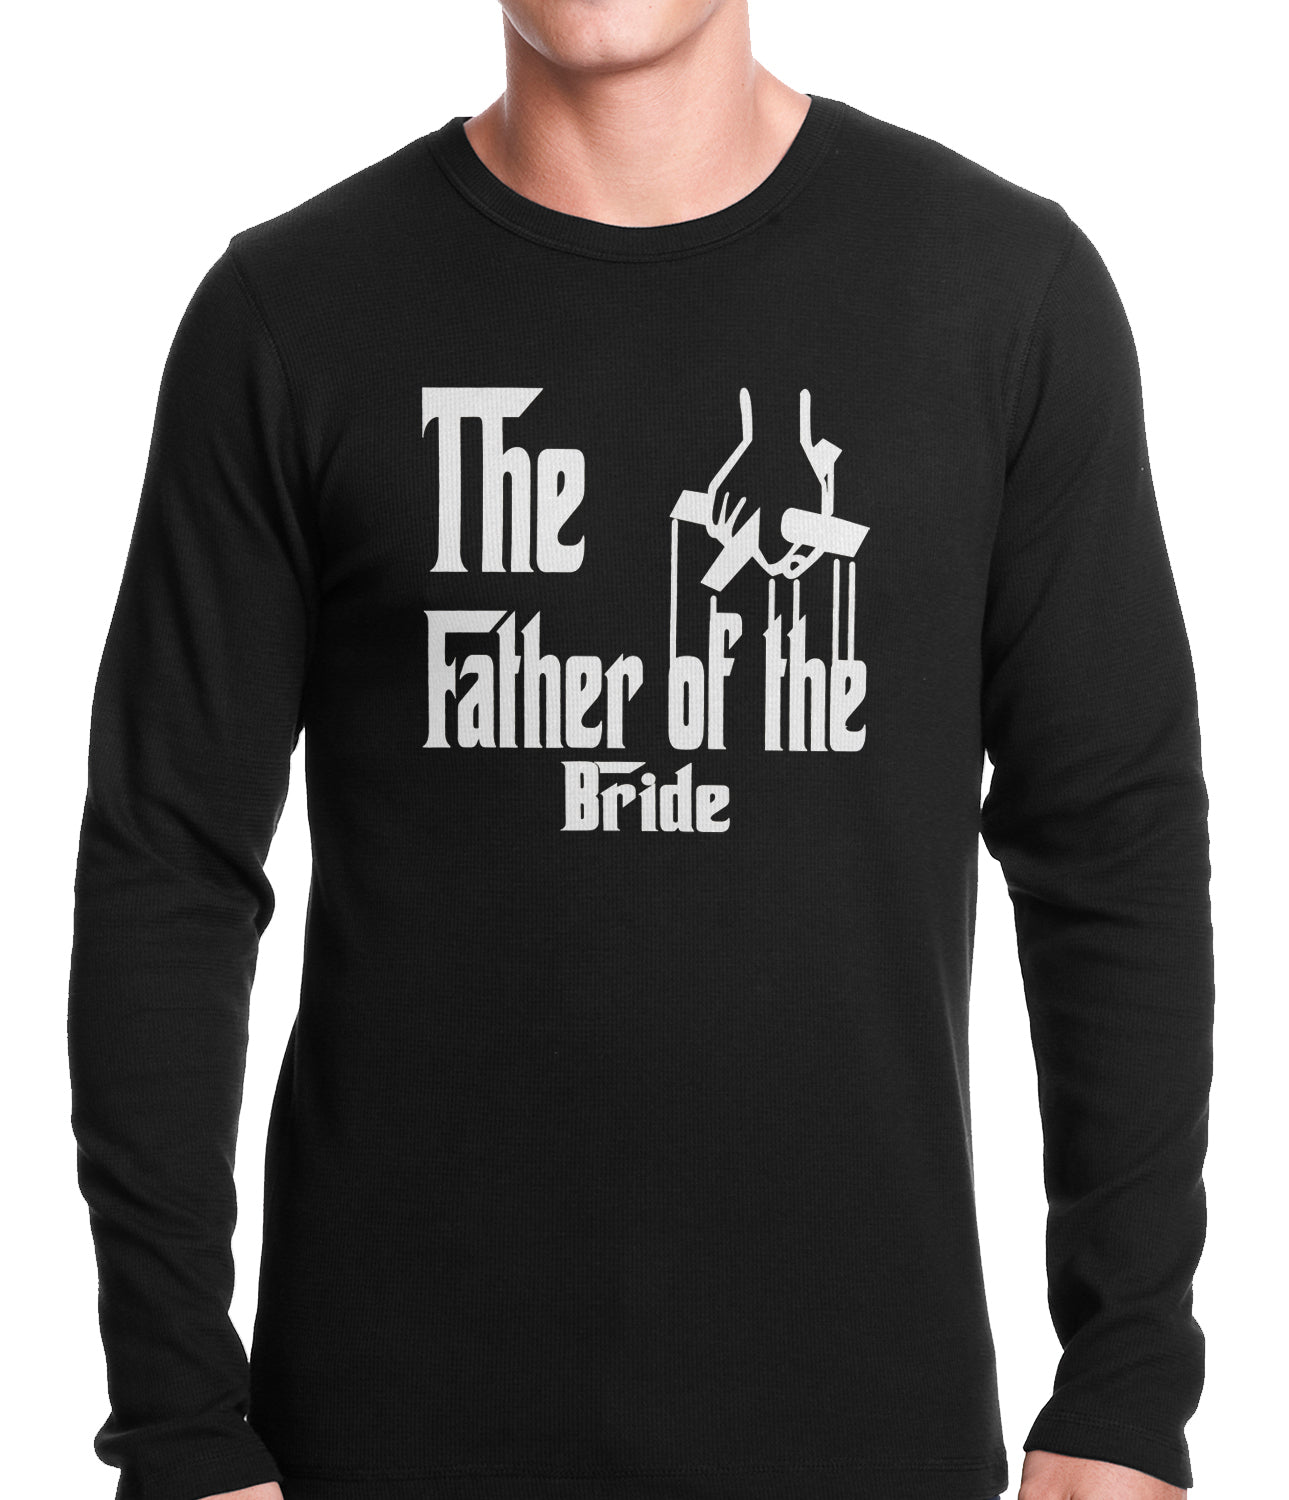 The Father of the Bride Funny Thermal Shirt